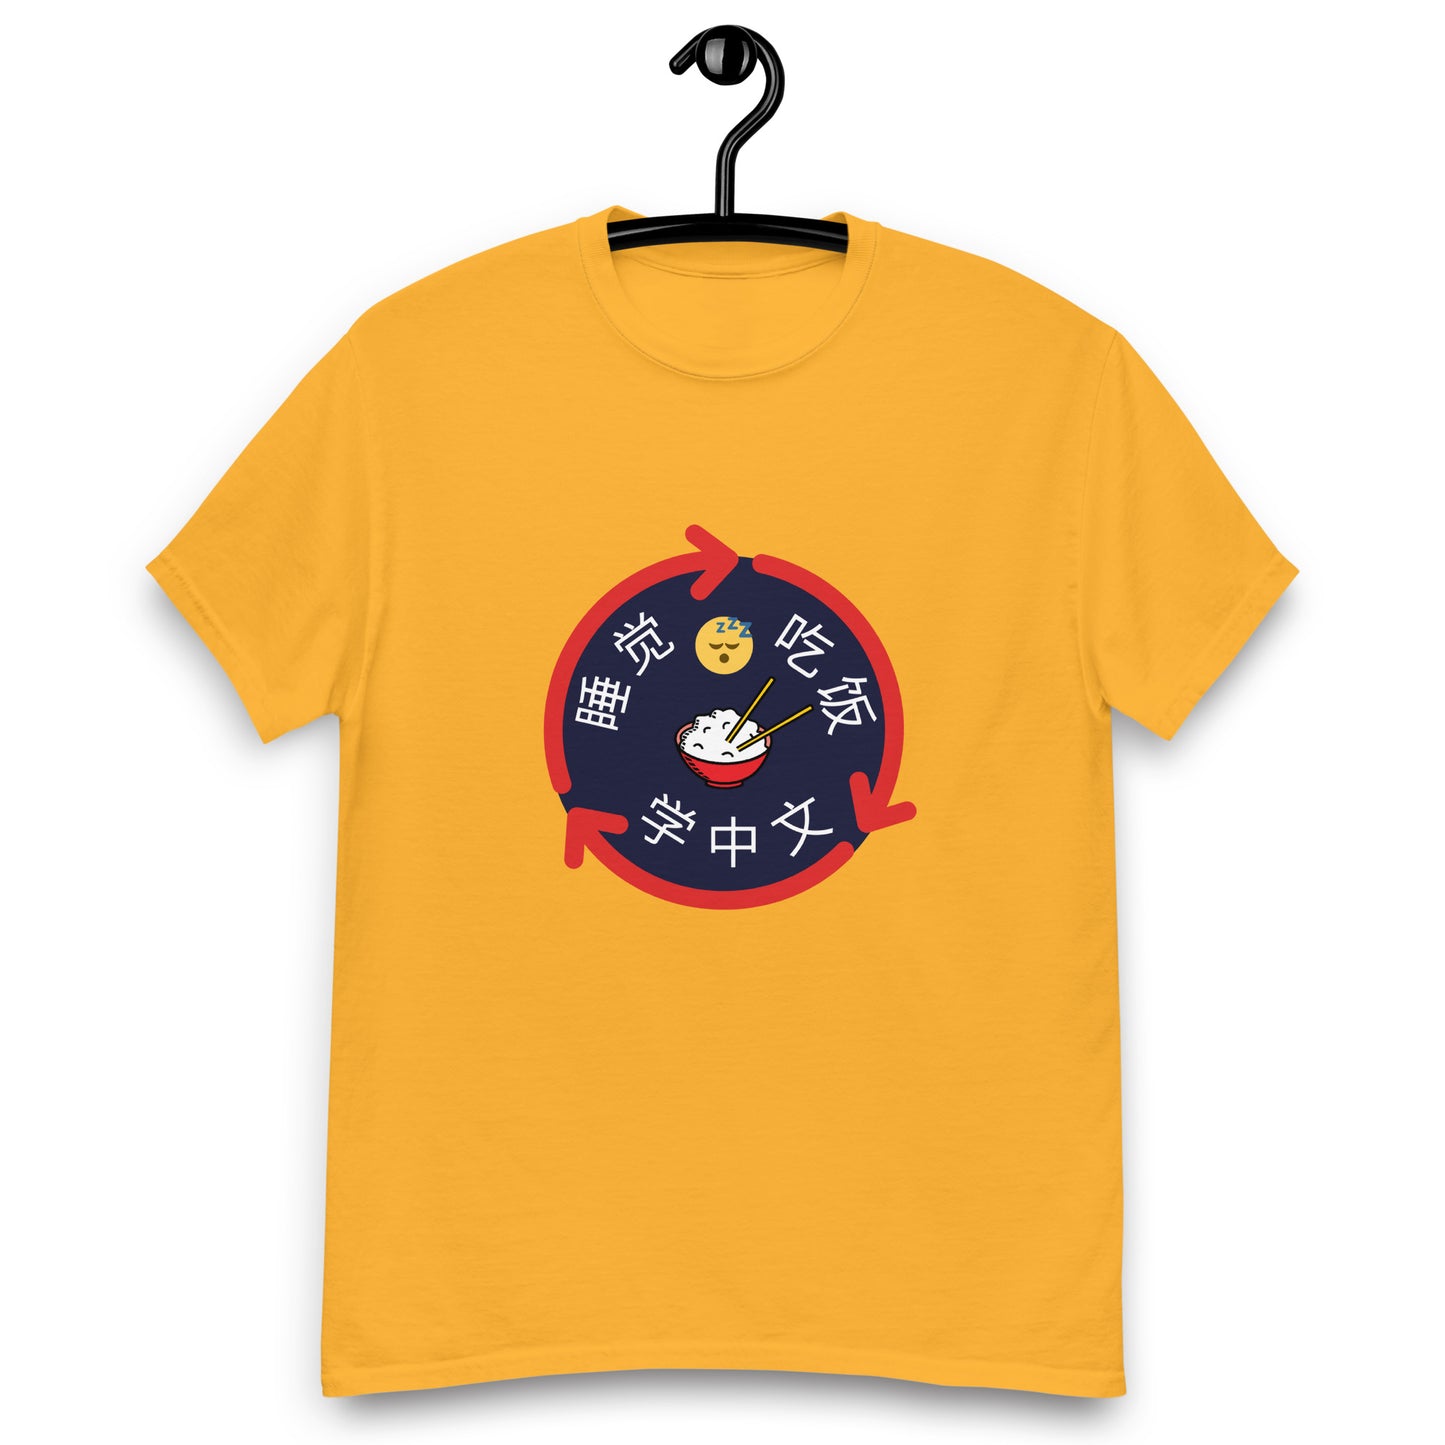 Mandarin Chinese Characters T-shirt, Funny, Humorous writing, Teacher Approved, 吃饭睡觉学中文，eat sleep learn Chinese and repeat